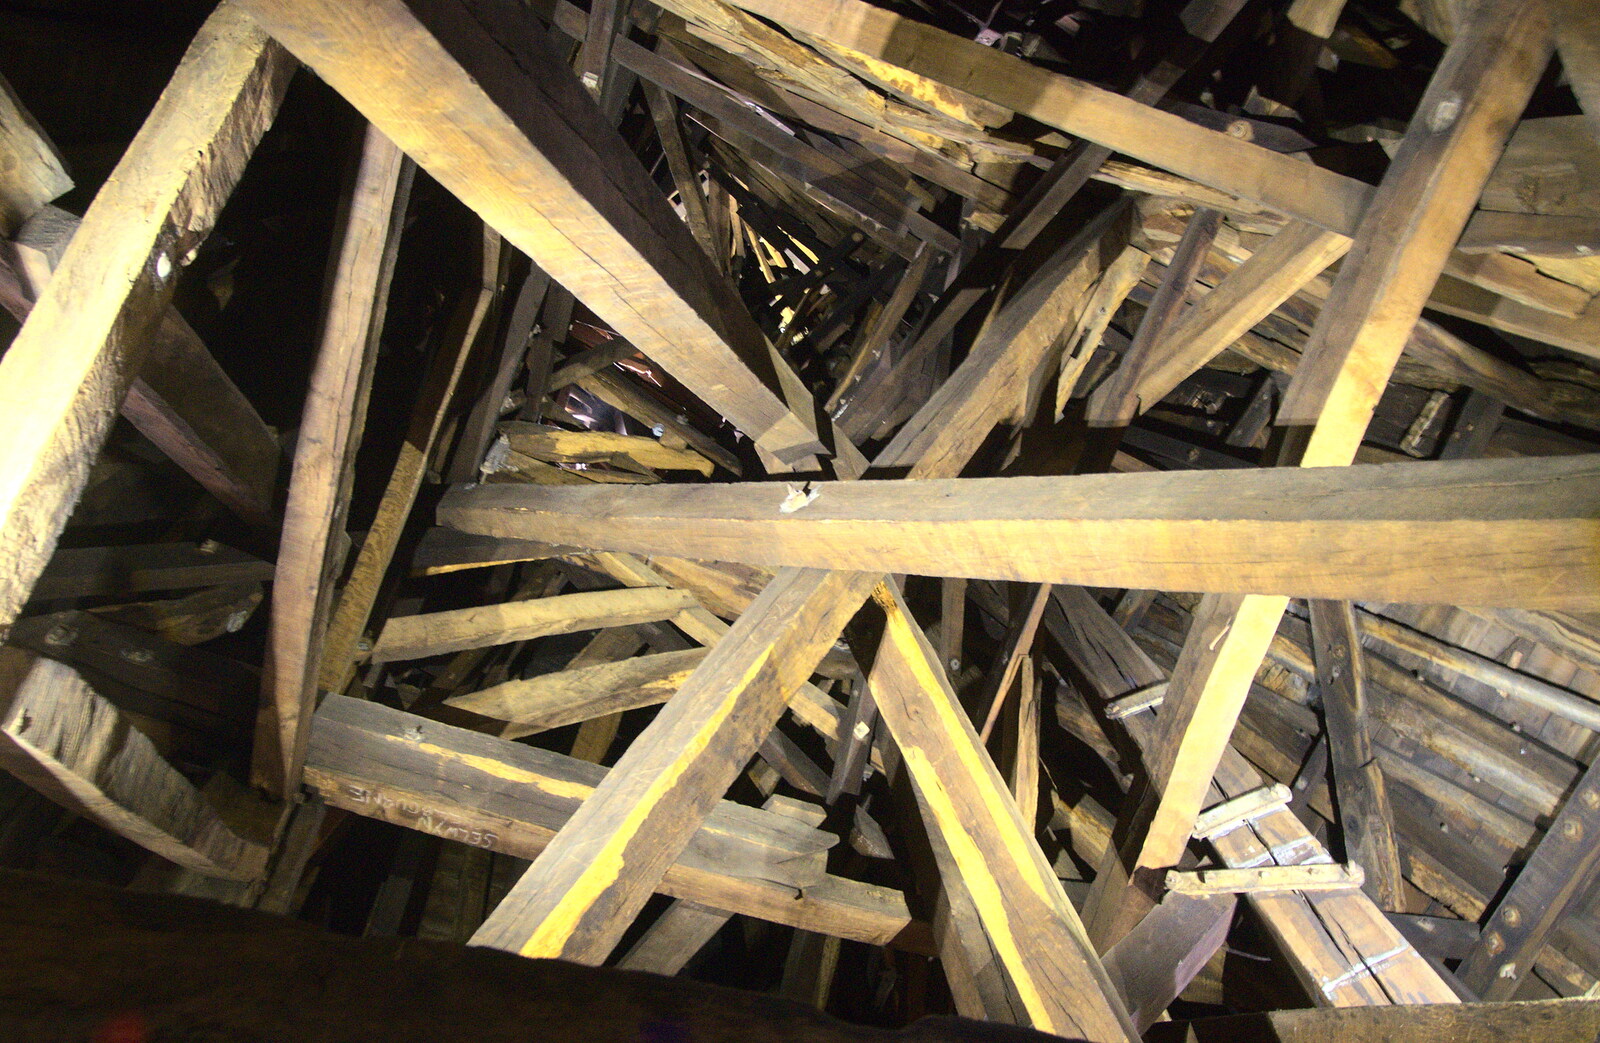 The chaotic timber work inside the tower from Chesterfield and the Twisty Spire, Derbyshire - 19th April 2013